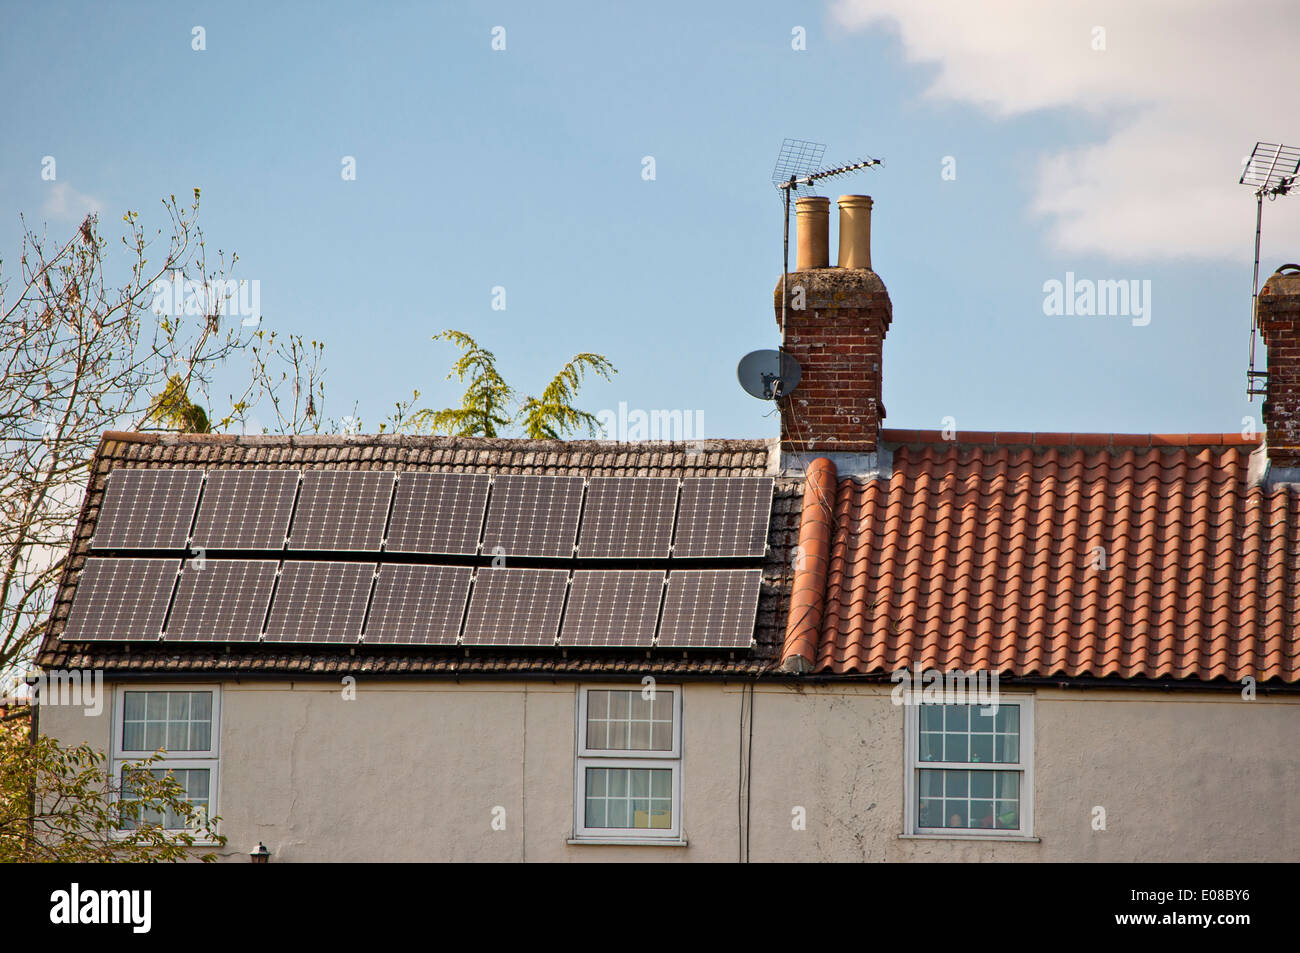 Solar roof panels on old rural county house cottage Stock Photo